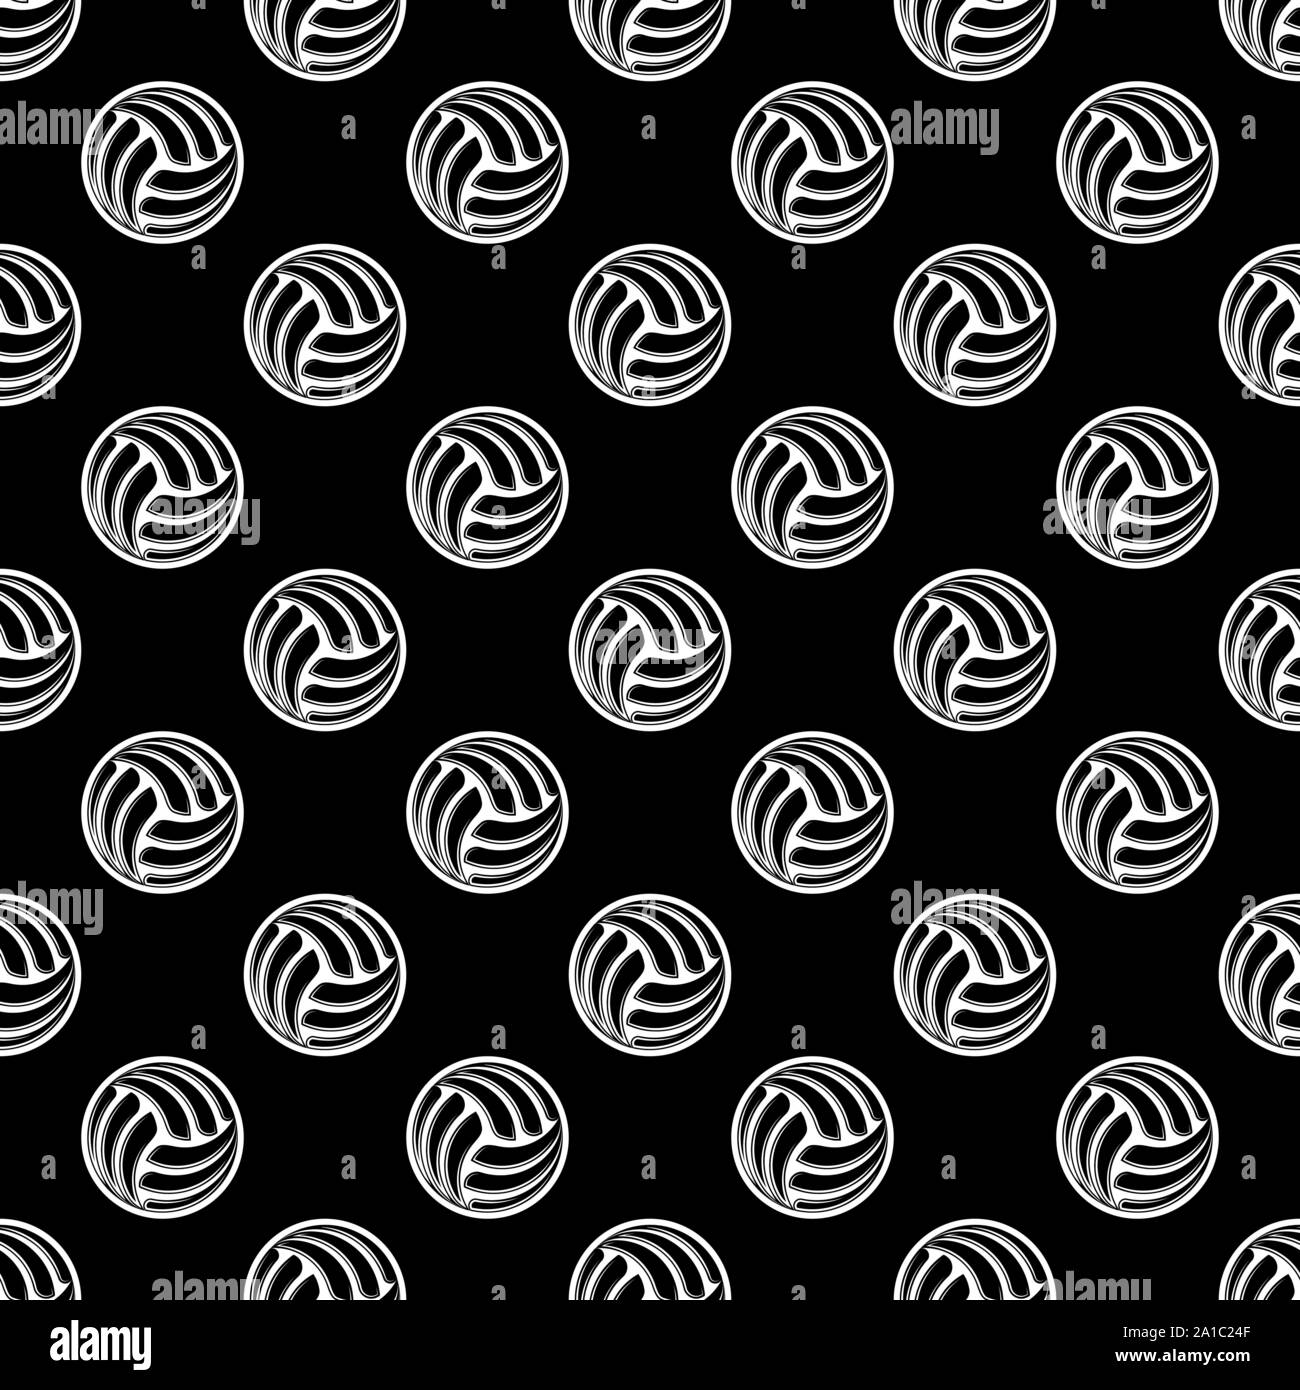 Black background with white outline seamless volleyball pattern Stock ...